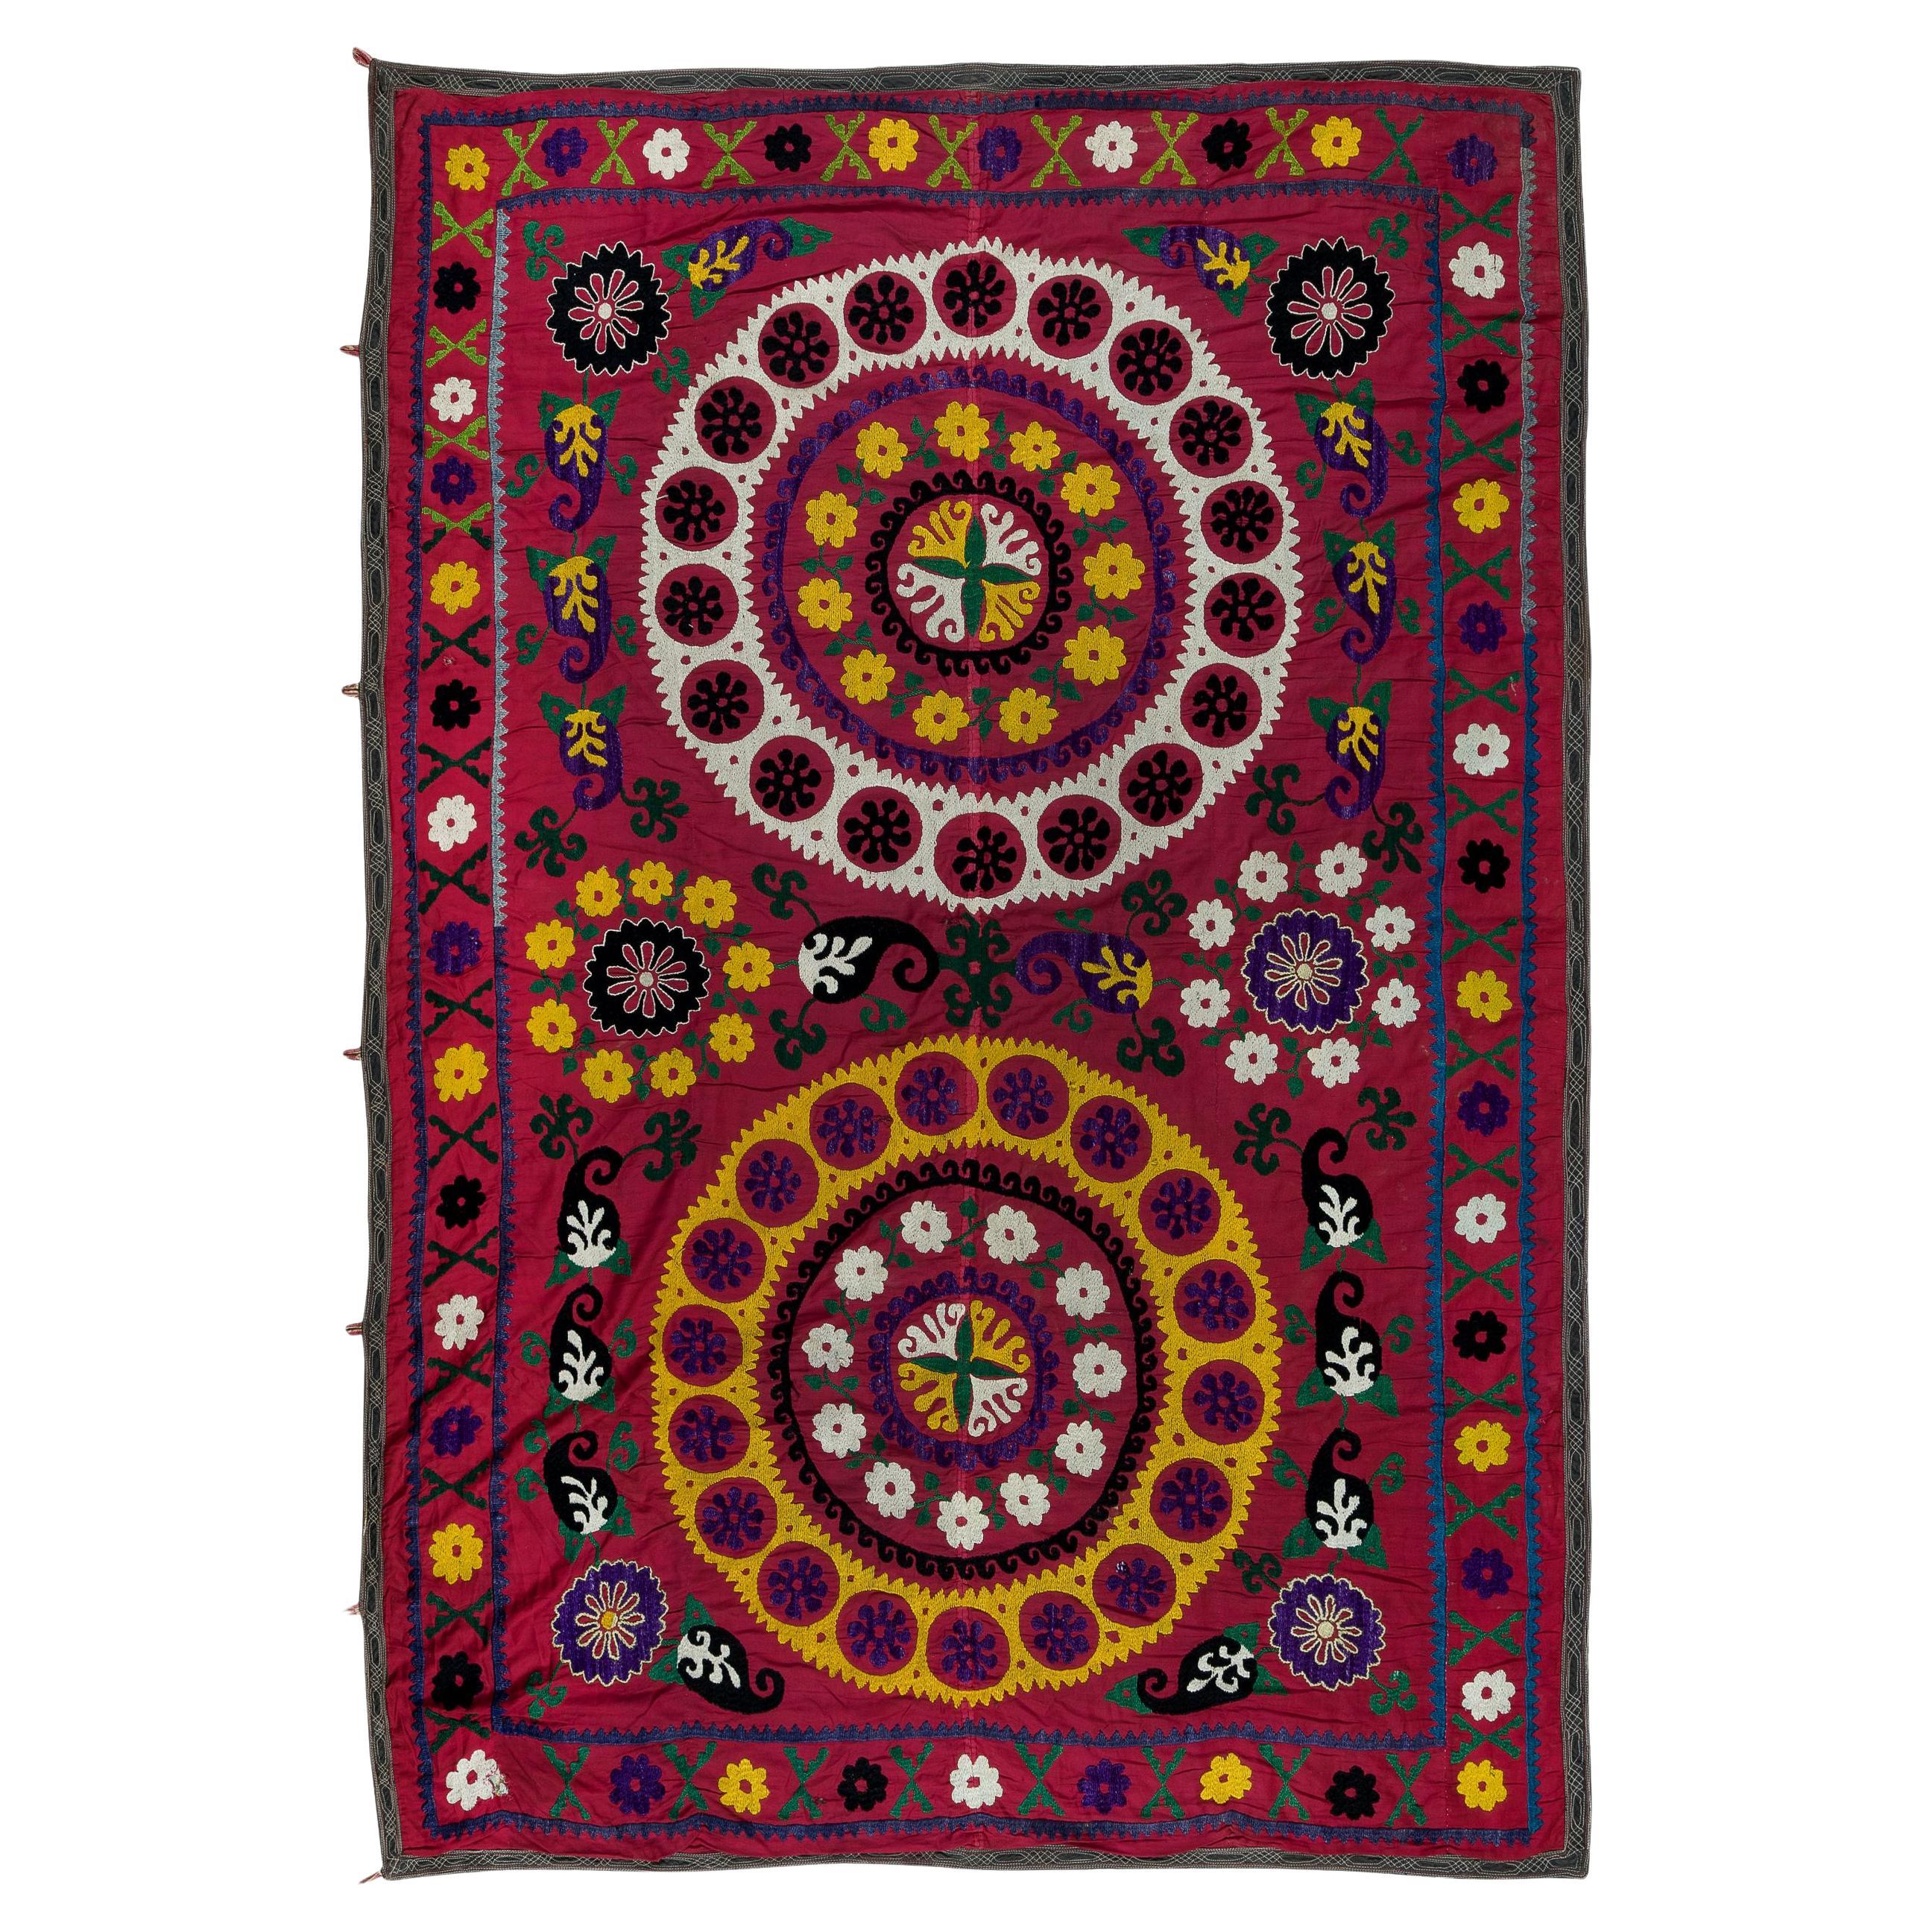 Silk Hand Embroidery Throw, Vintage Suzani Tapestry, Uzbek Wall Hanging For Sale